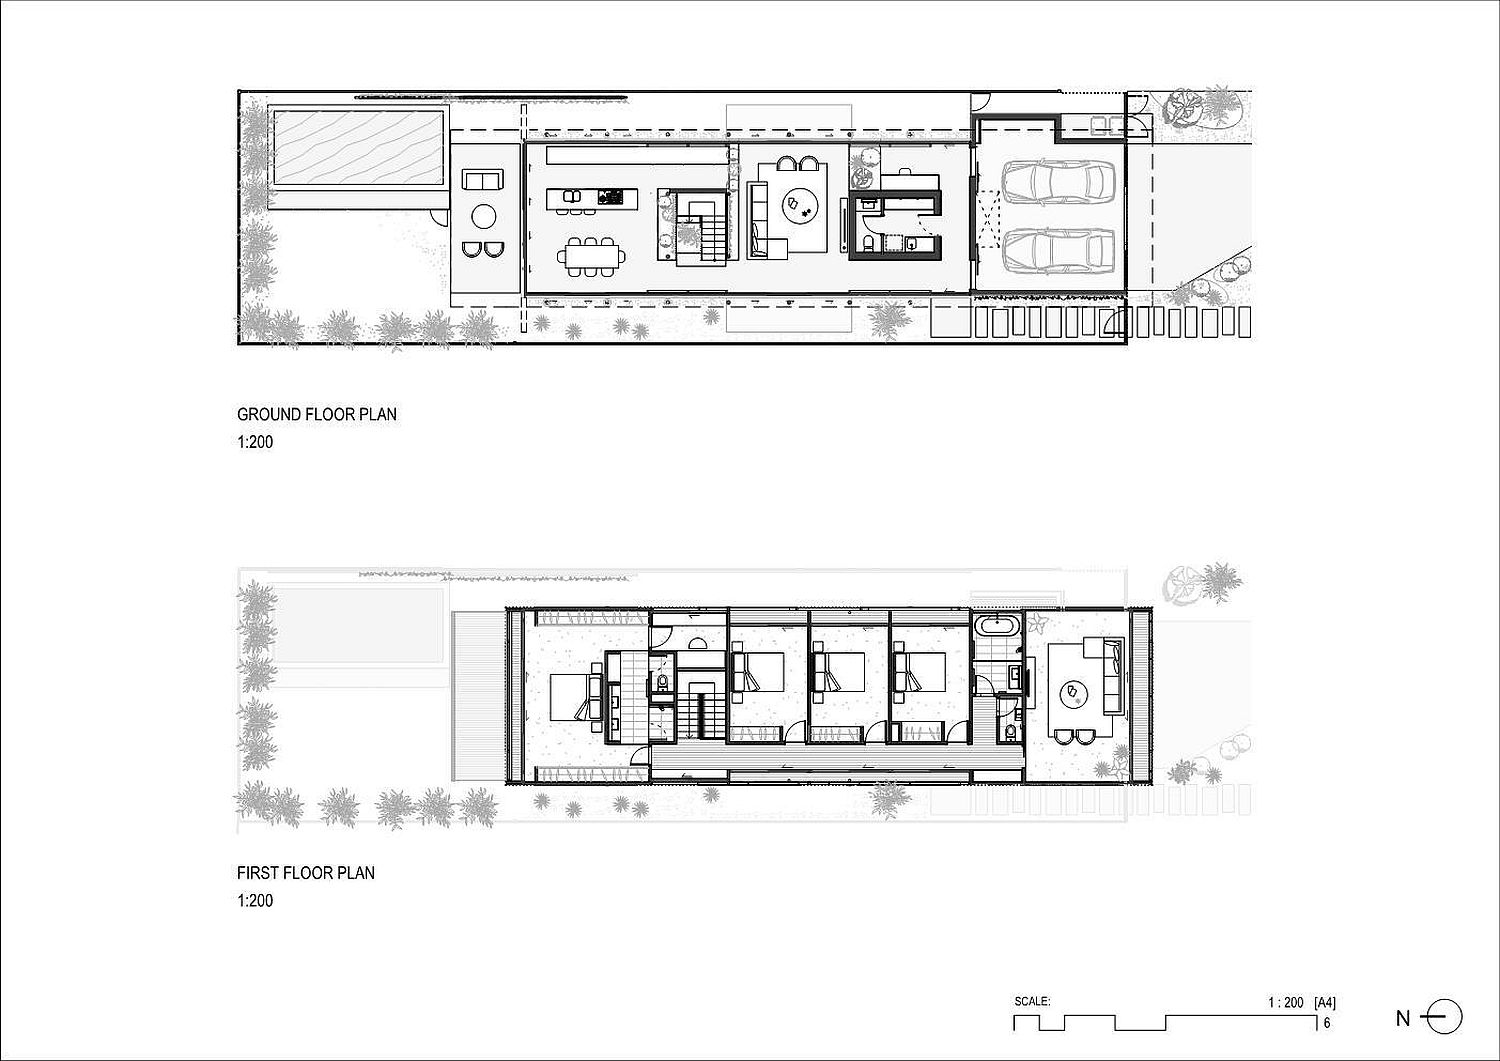 Floor plan of the house with public areas on lower level and bedrooms on upper level